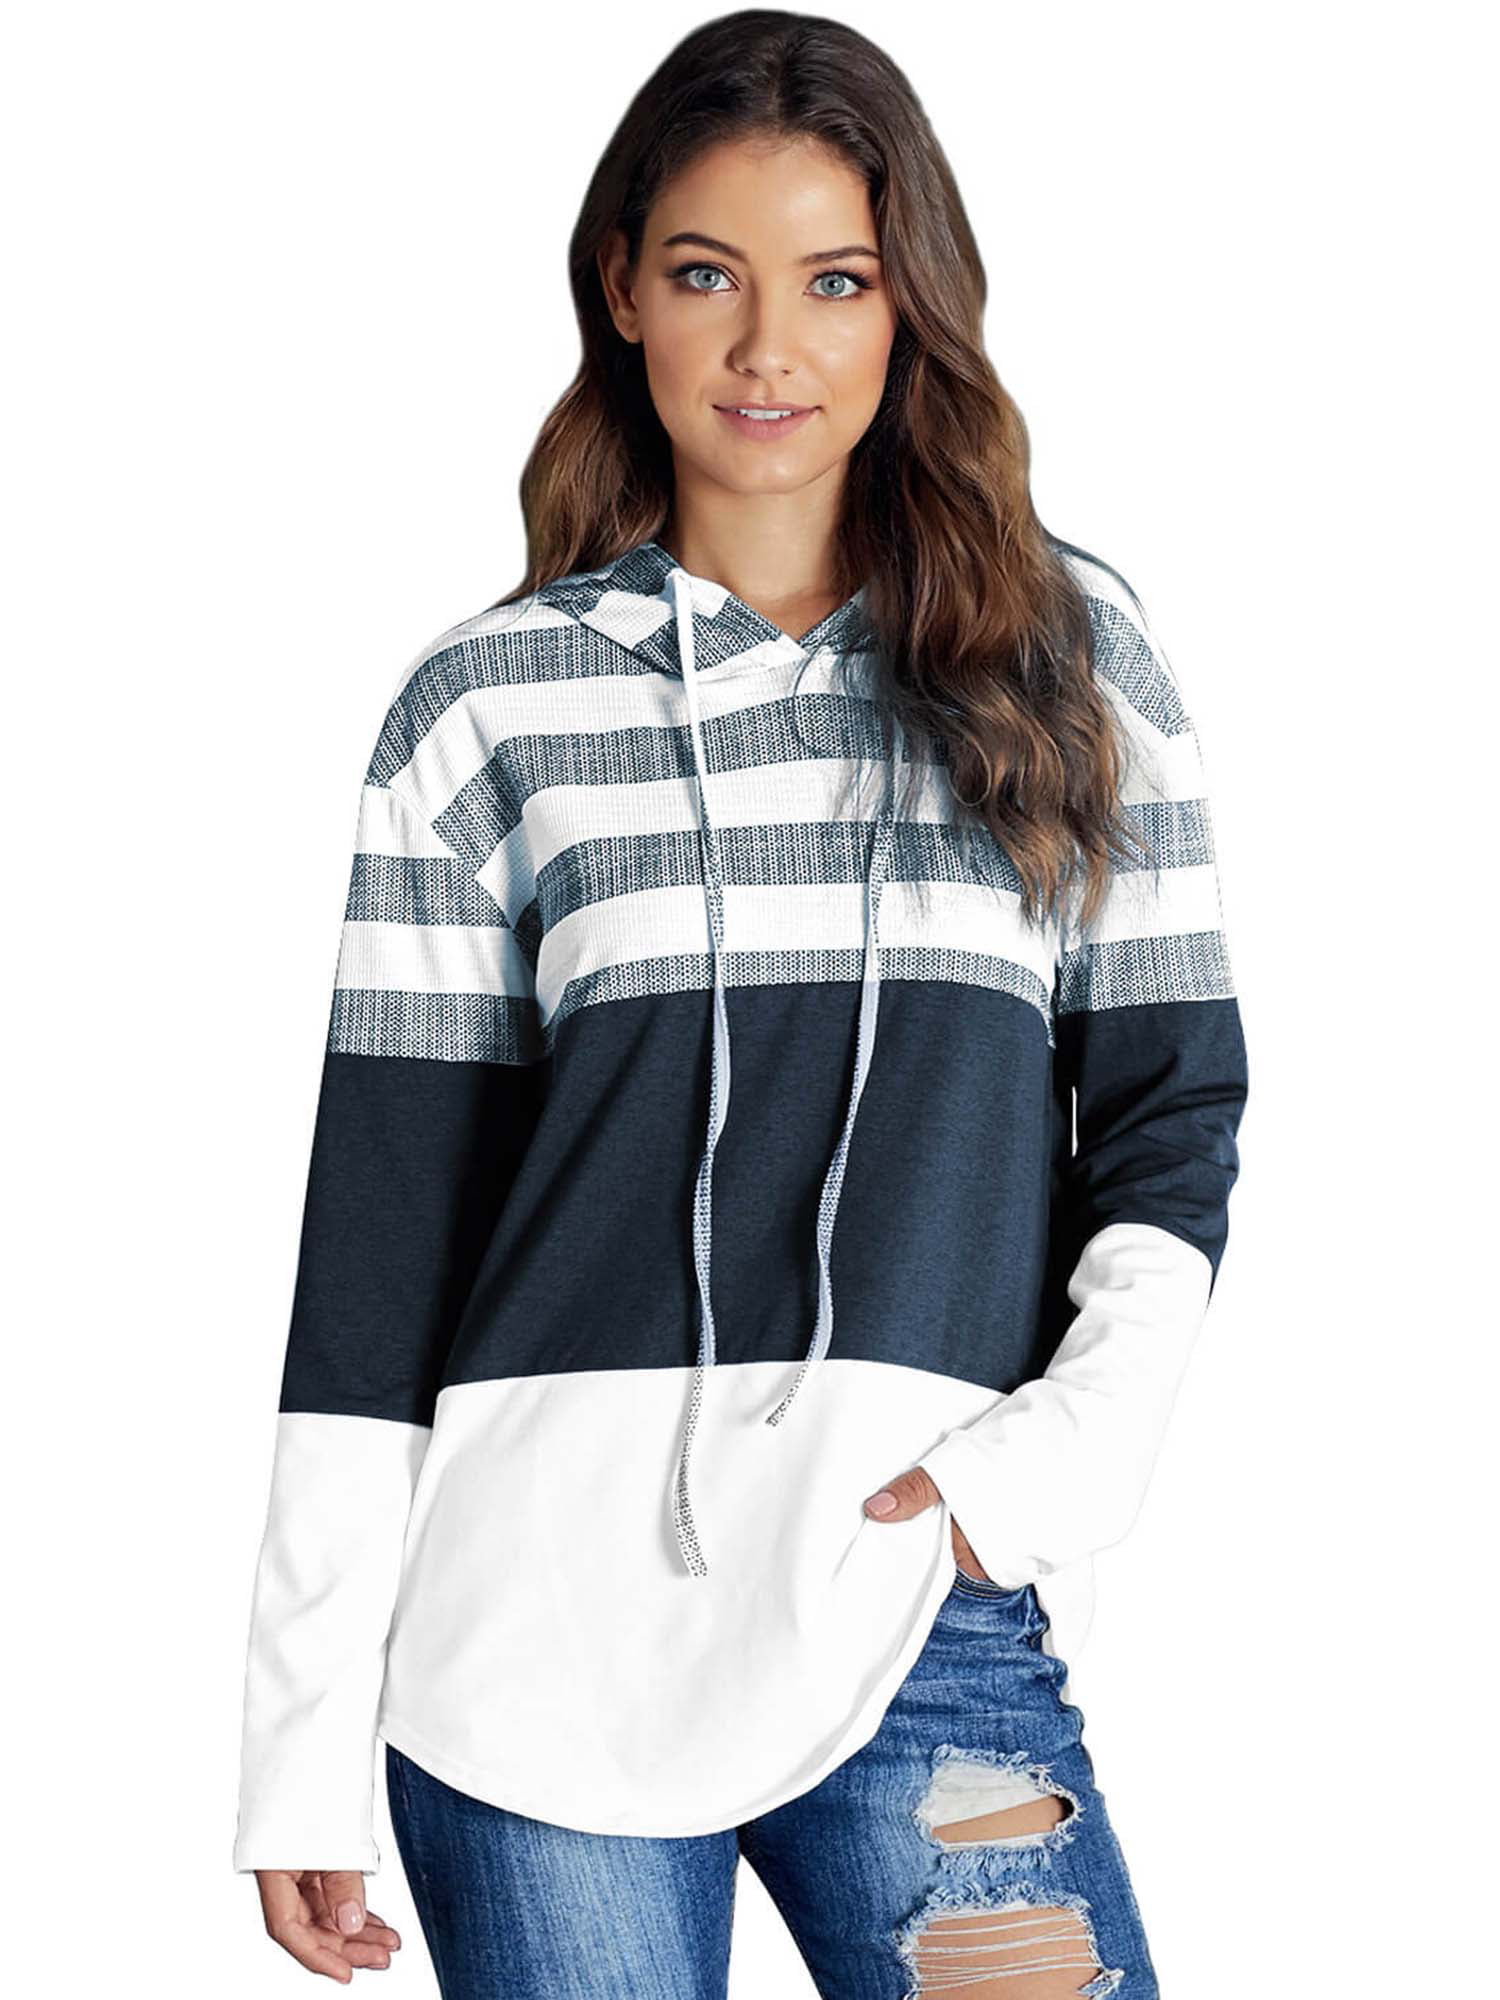 Swarovo Women S White Long Sleeve Hoodie Pullover Tops Casual Loose Oversized Hooded